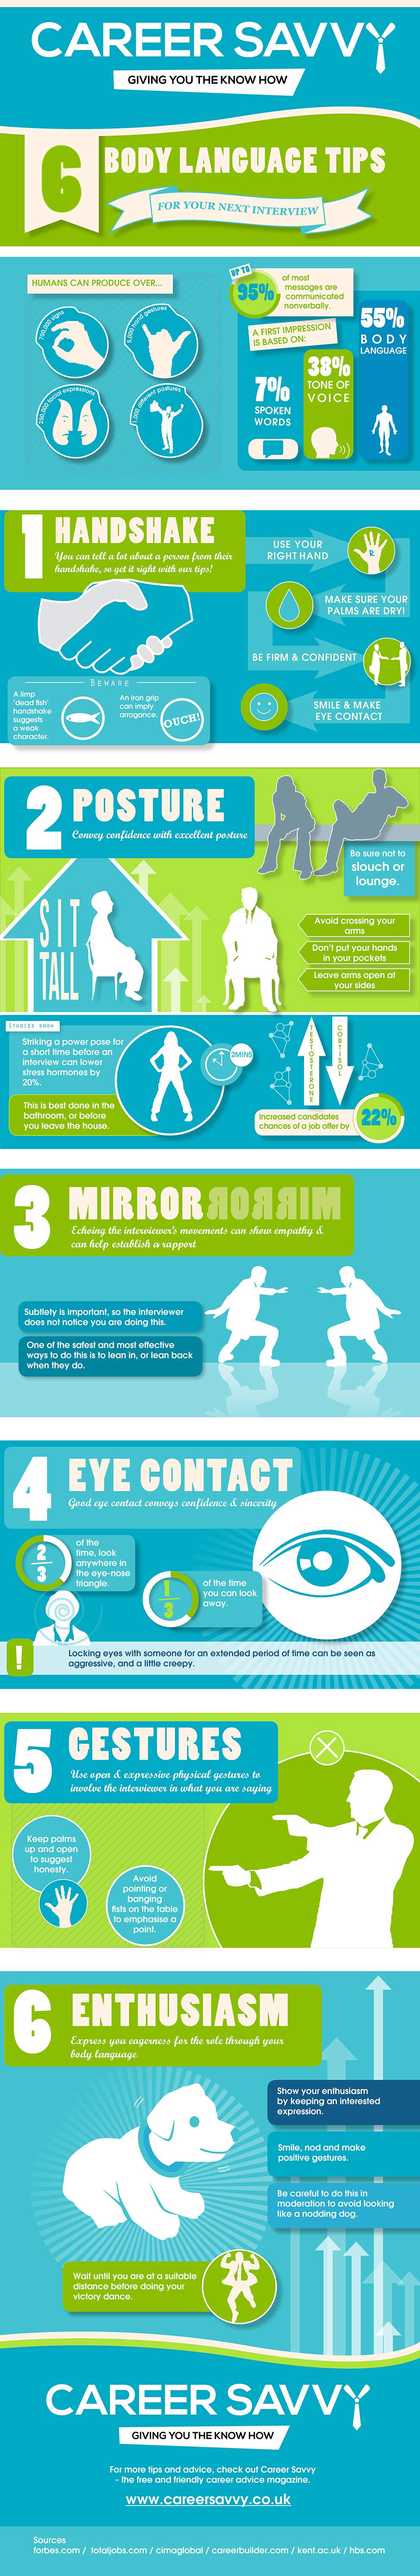 Top 6 Body Language Tips For Your Next Job Interview [INFOGRAPHIC